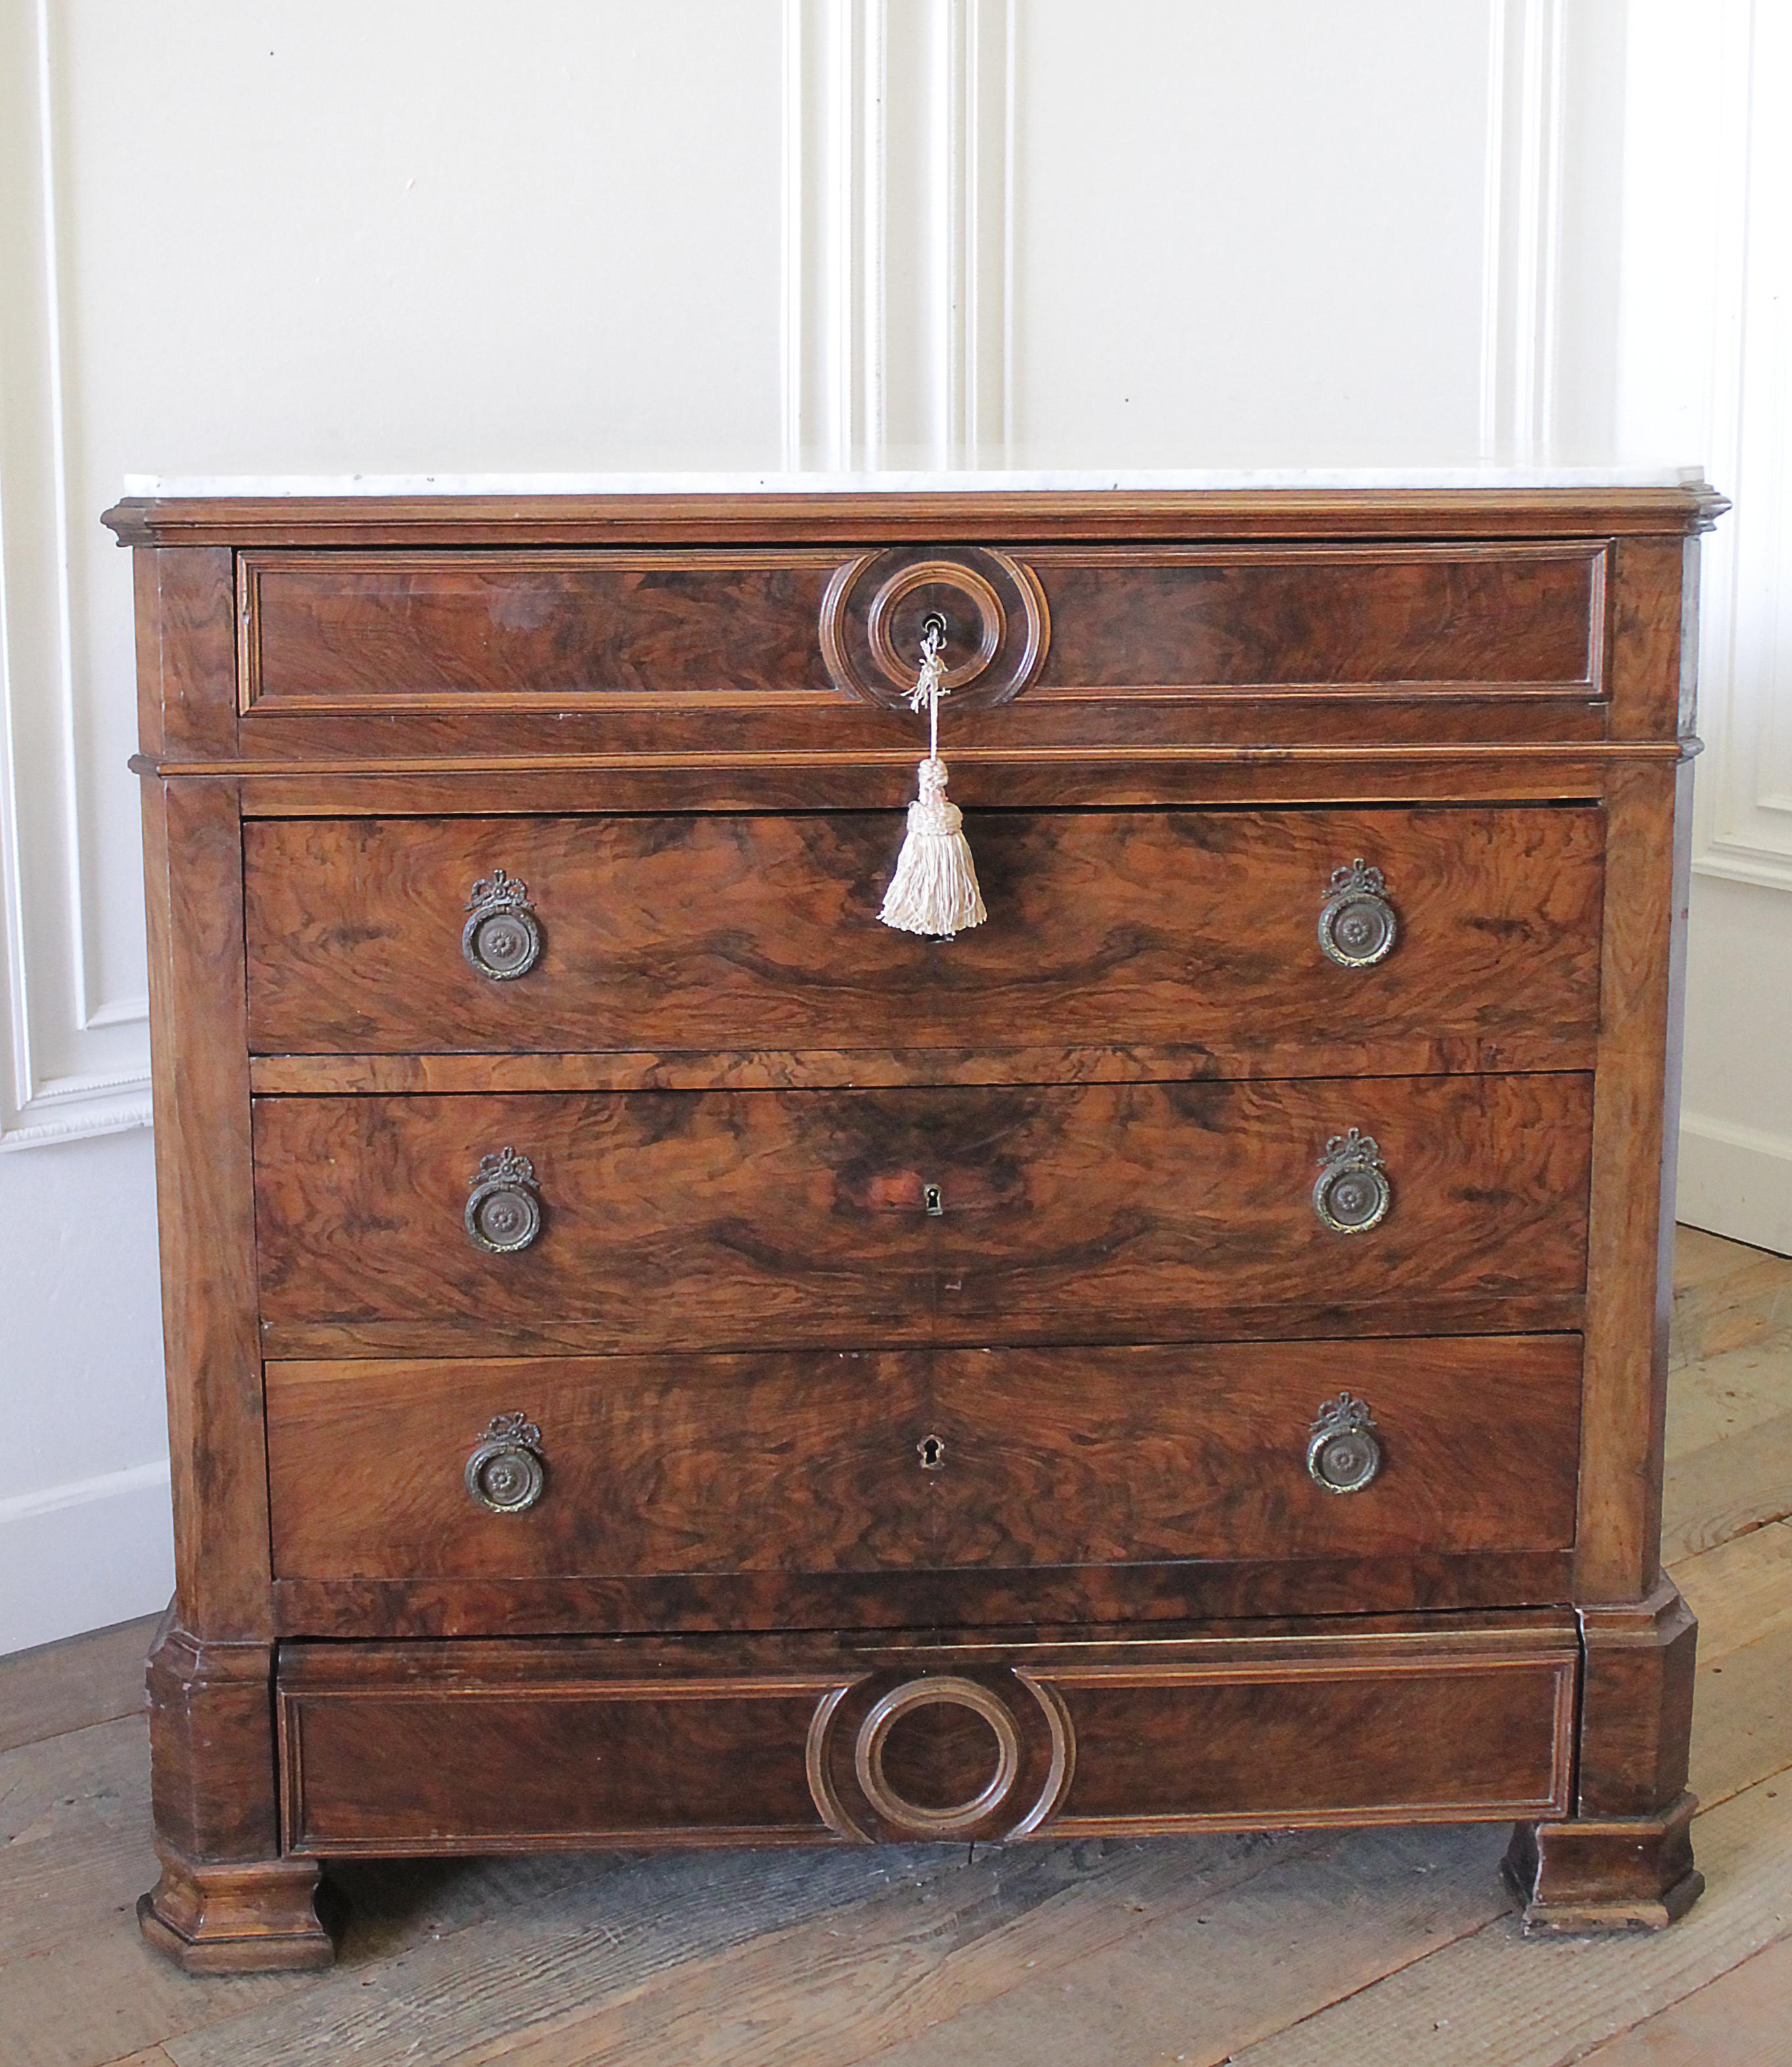 19th century inlay Empire style chest of drawers with marble top
working locking original key. Drawers open and close with ease. Five drawers total.
Some minor scratches present. The marble is original, has markings. 
Measures: 42.5